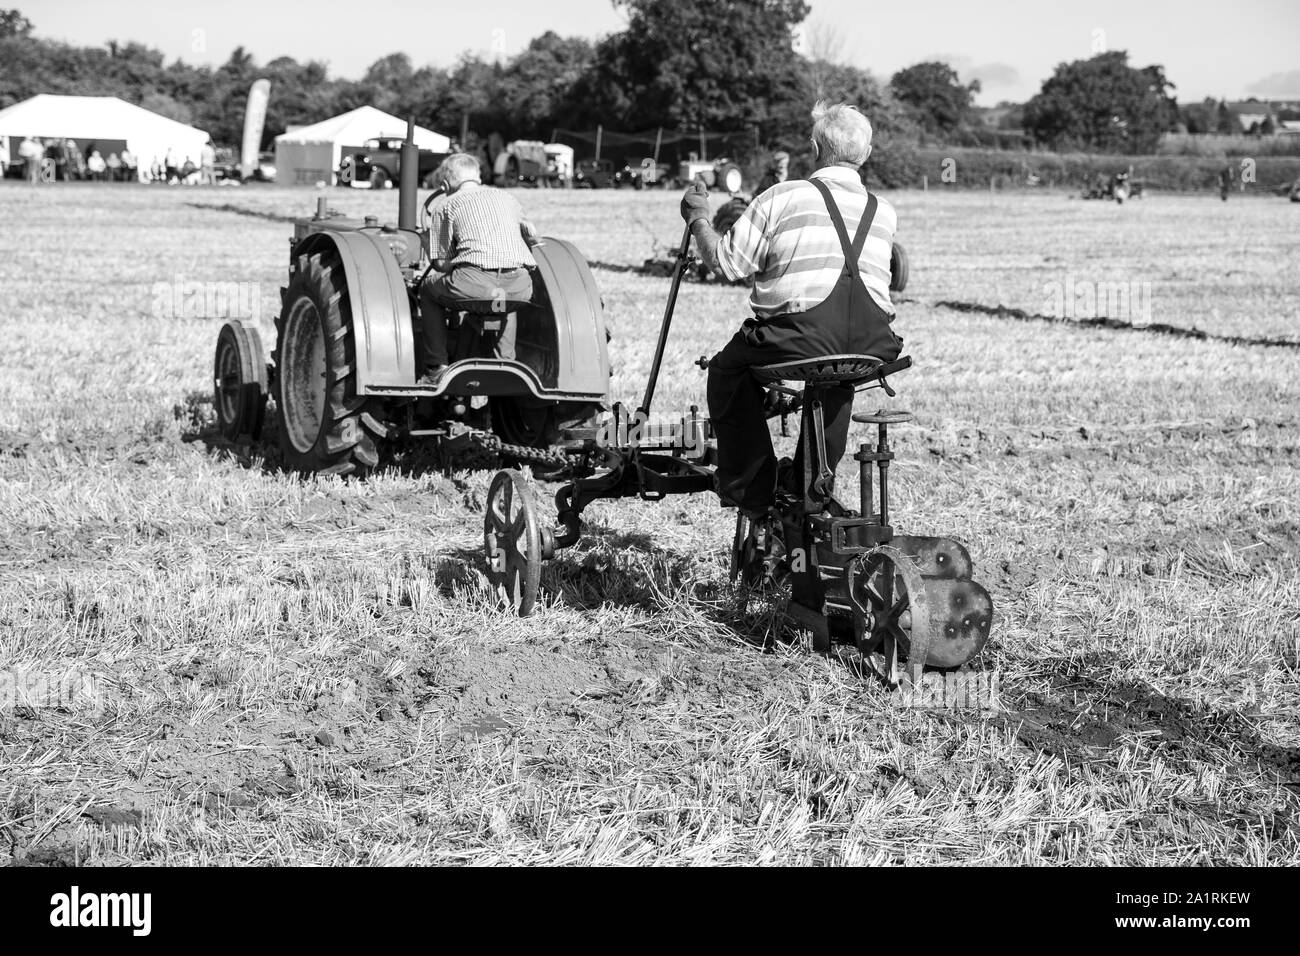 2 Farmers Ploughing using a John Deere General Purpose Vintage Tractor at the Chew Stoke Vintage Tractor and Ploughing Display 2019 Stock Photo